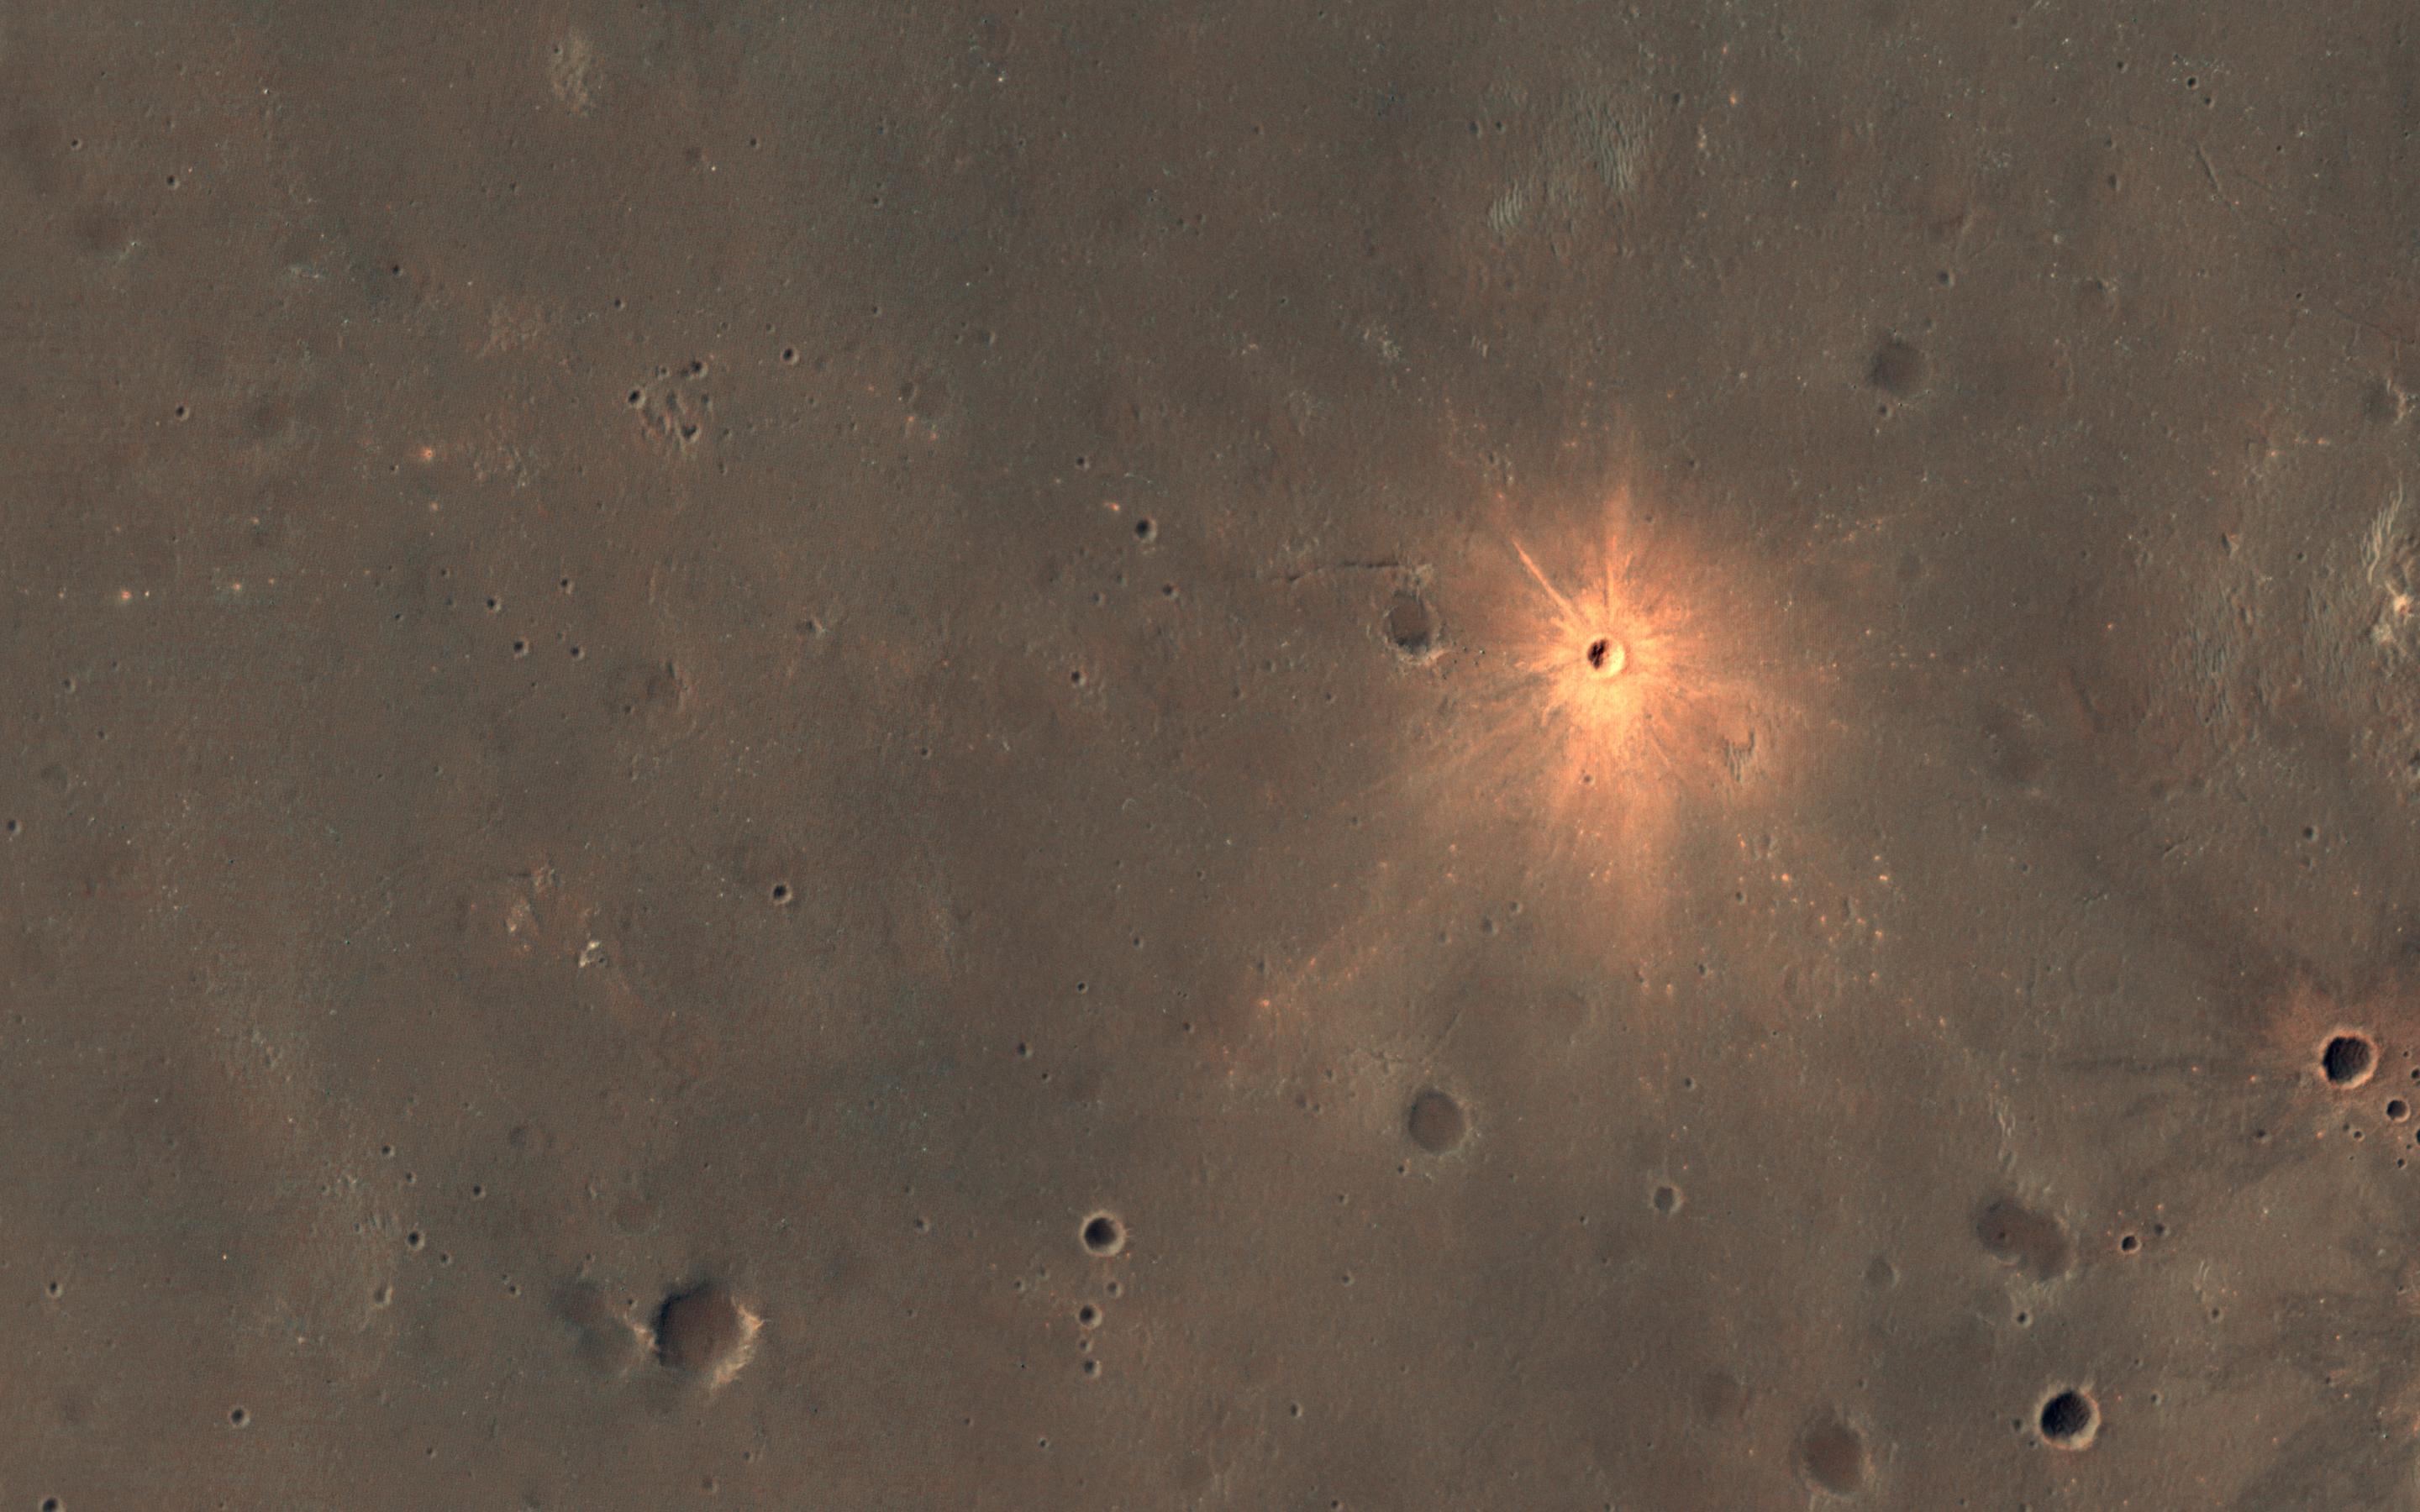 PIA24619: A New Impact Crater with Bright Ejecta